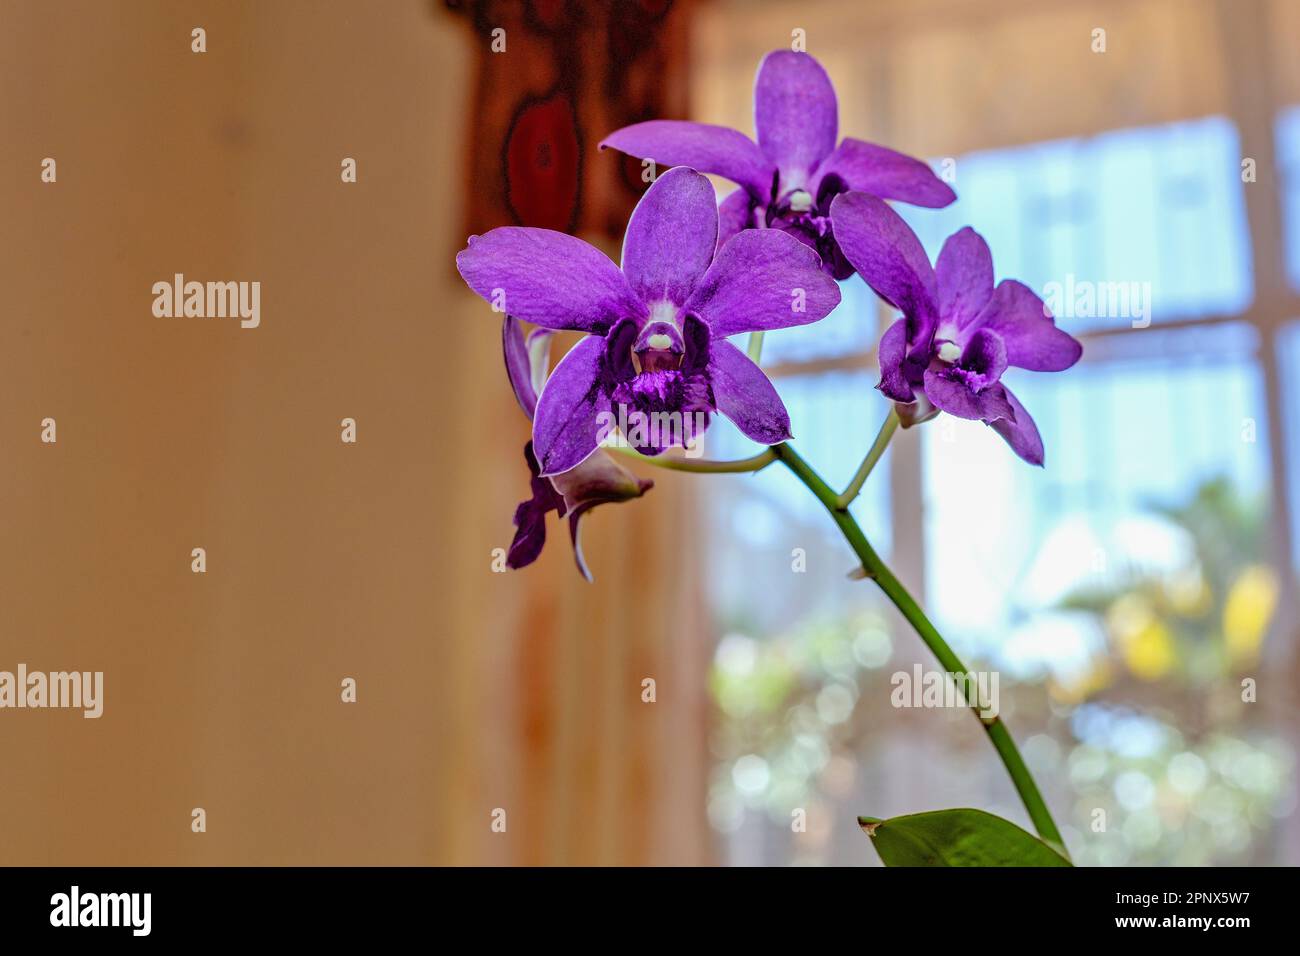 indoor growing blooming colorful orchid Stock Photo